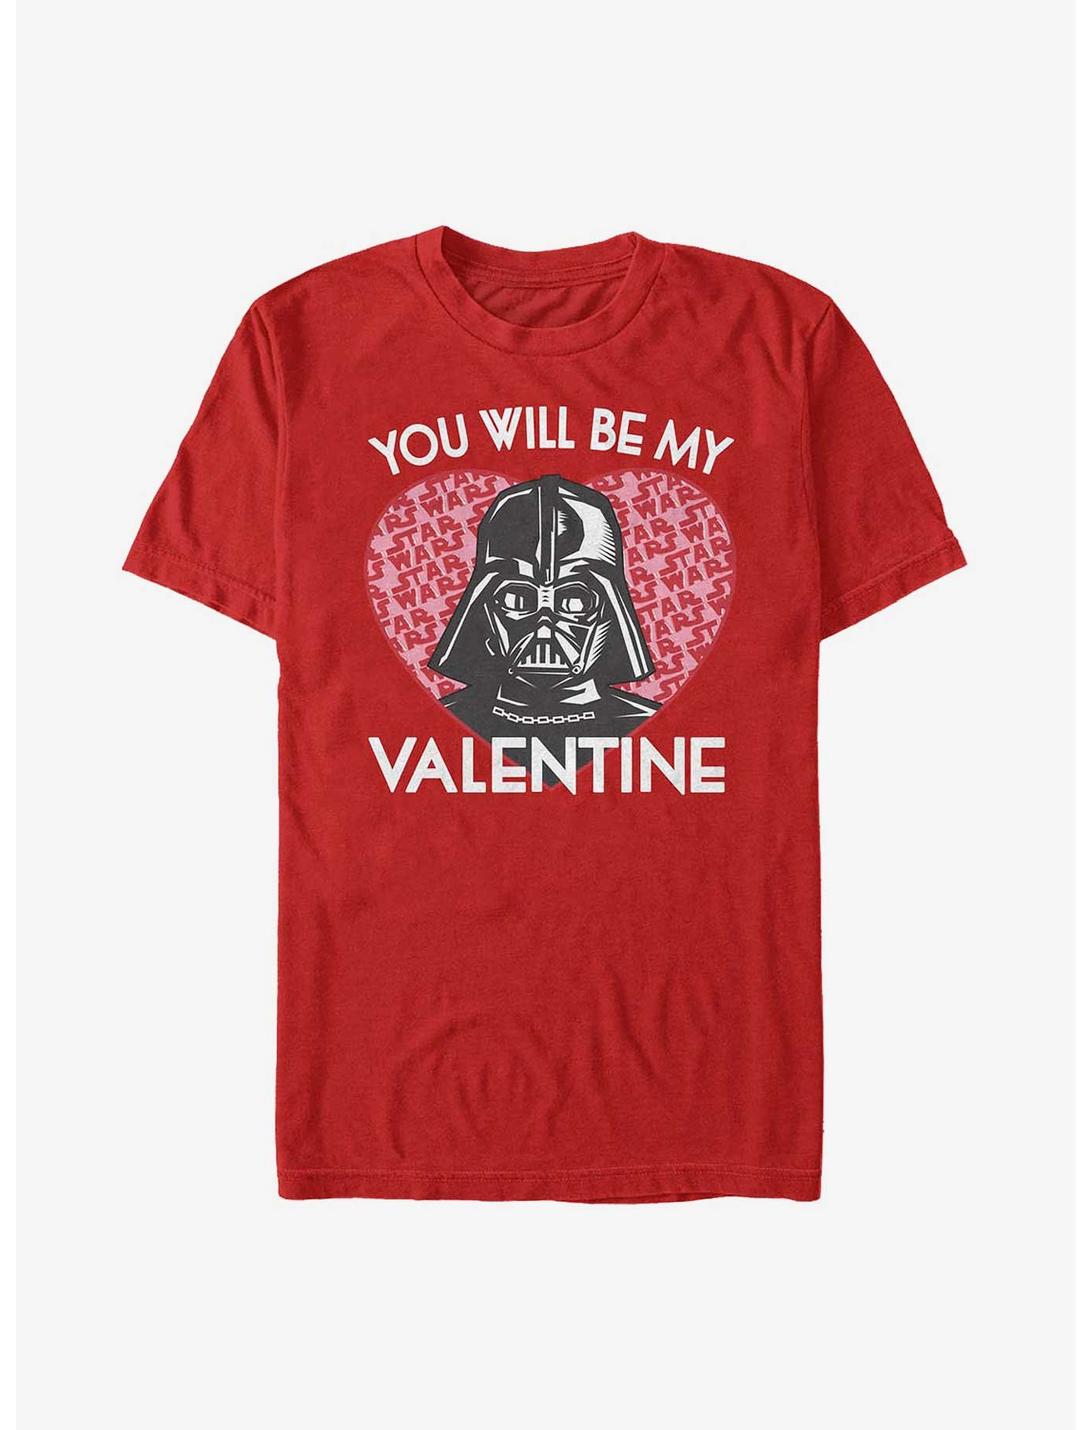 Star Wars Darth Vader You Will Be My Valentine T-Shirt, RED, hi-res